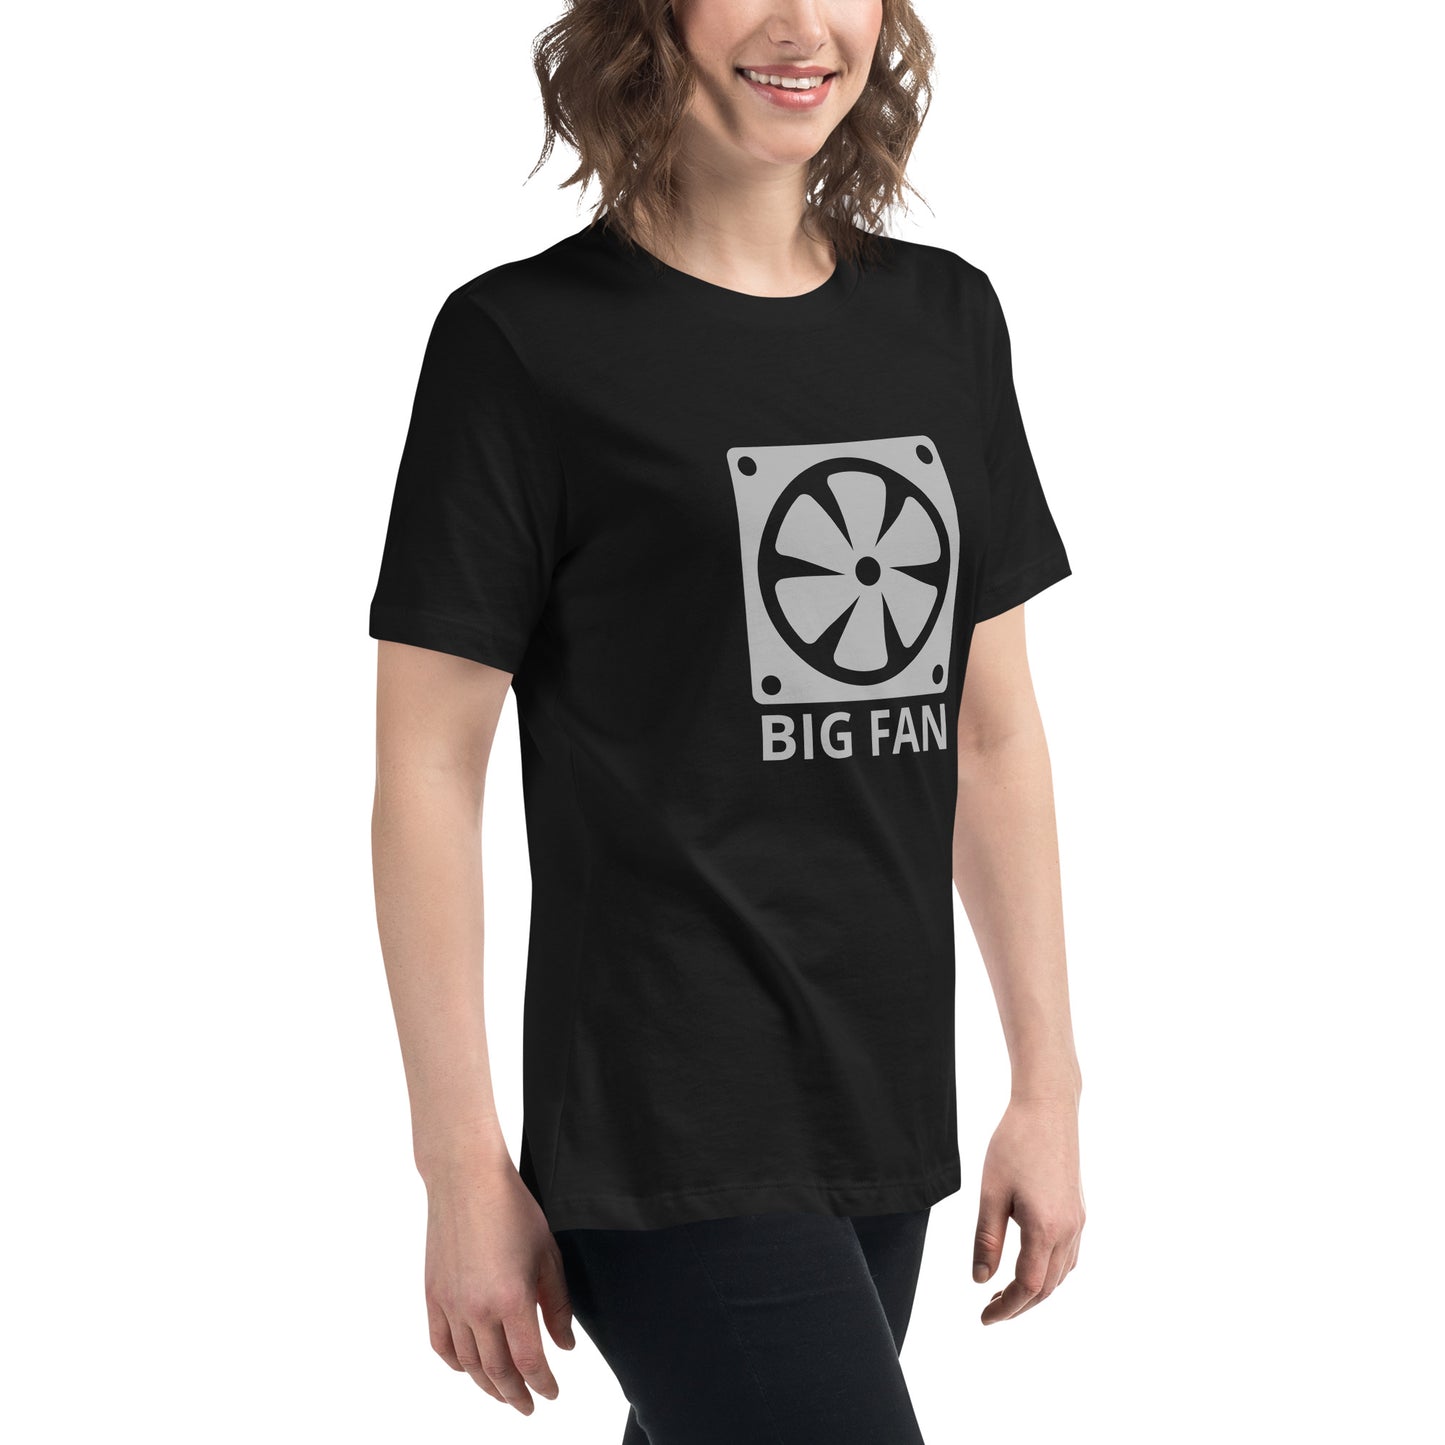 Women with black t-shirt with image of a big computer fan and the text "BIG FAN"